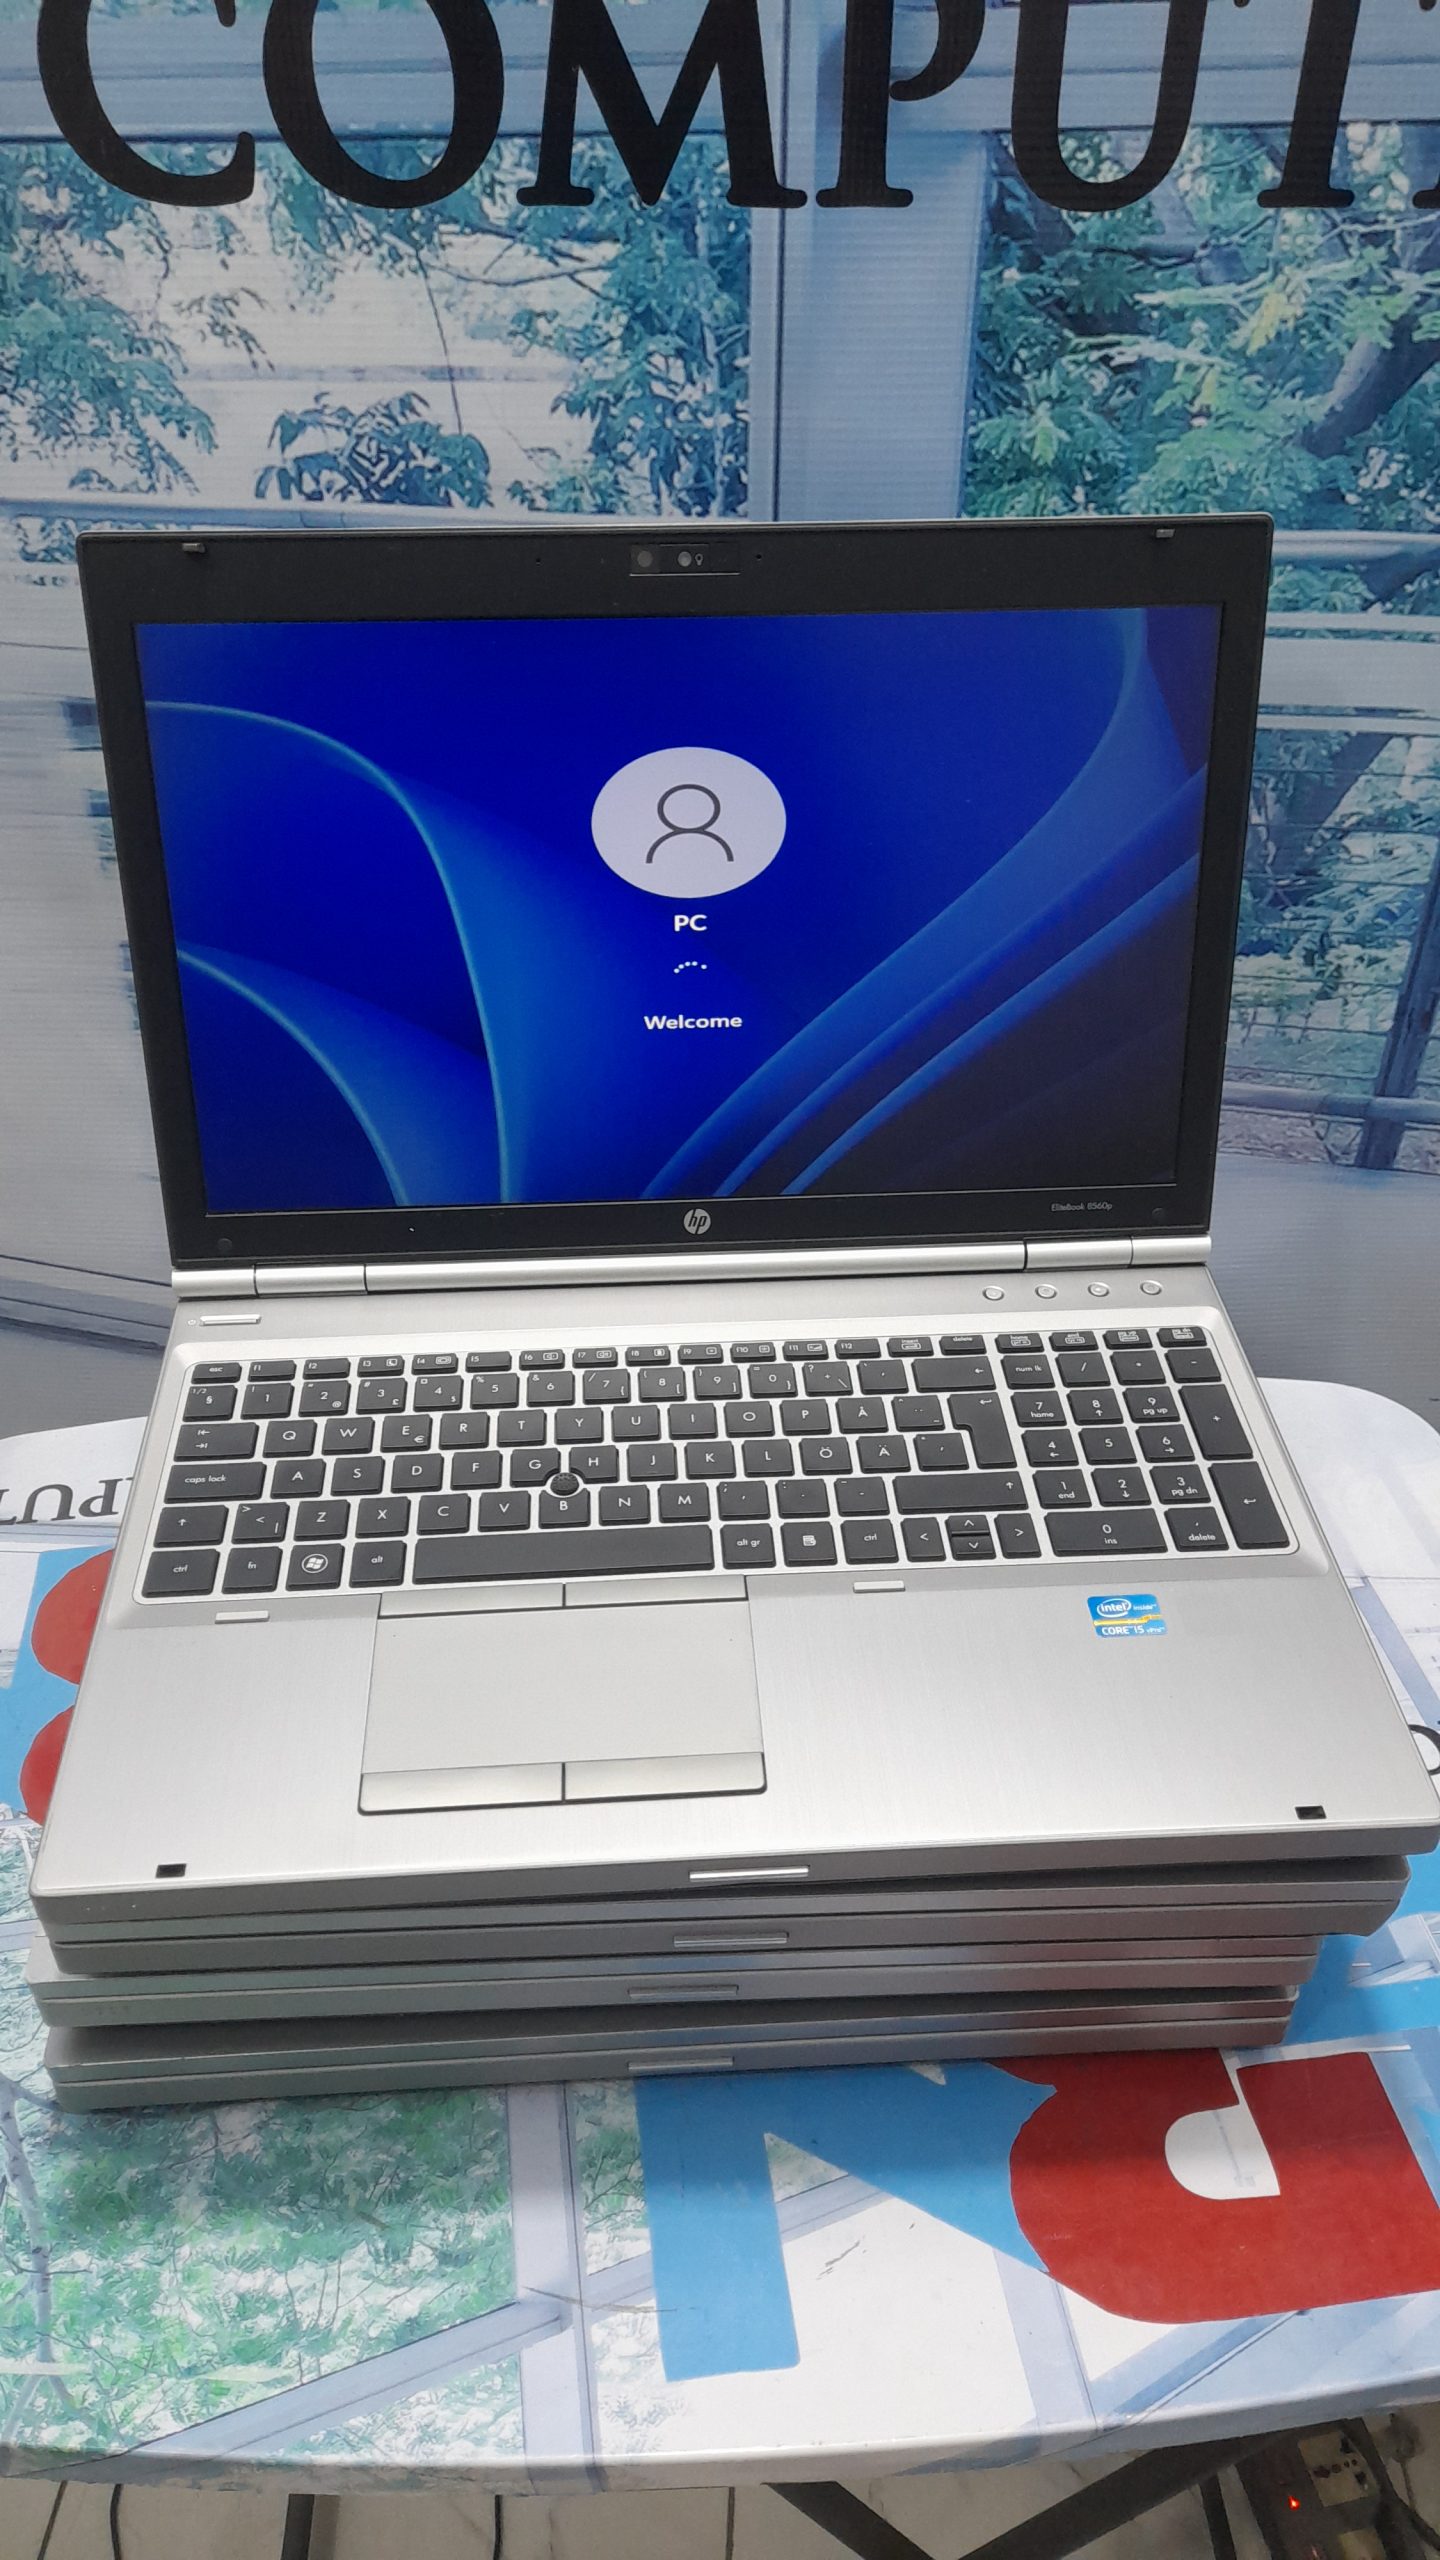 used laptops for sale in lagos computer village, 8th generation laptop for sale in lagos nigeria, 12th generation hp laptop for sale in lagos ikeja,HP EliteBook1030 G1 8GB Intel Core I5 SSD 256GB, gbn mobile computer warehouse, laptop warehouse for ikeja computer vilage, laptop wholesale shop in lagos oshodi ikeja computer village ladipo mile2 lagos, hp intel core i7 laptops for sale, hp touch screen laptop for sale,uk used laptops on jumia, fairly used laptops for sale in ikeja, Used laptops for sale cheap , uk used laptops for sale in lagos ,HP EliteBook Folio 1040 G3 - 6th Gen. Intel Core i7 - 256GB SSD - 16GB RAM - 8GB Total Graphics - NonTouchscreen - keyboard Light - HDMI ,HP Folio 1040 G3 - 6th Generation Intel Core i5 - 256GB SSD - 8GB RAM - 4GB Total Graphics - Keypad Light - Touchscreen - HDMI,american used lenovo thinkpad T460s for sale in lagos computer village lagos, used laptops for sale, canada used laptops for sale in lagos computer village, affordable laptops for sale in ikeja compkuter village, wholesale computer shop in ikeja, best computer engineering shop in ikeja computer village, how to start laptop business in lagos, laptop for sale in oshodi, laptops for sale in ikeja, laptops for sale in lagos island, laptops for sale in wholesale in alaba international lagos, wholes computer shops in alaba international market lagos, laptops for sale in ladipo lagos, affordable laptops for sale in trade fair lagos,new american hp laptop arrival in ikeja, best hp laptops for sale in computer village, HP ProBook 450 G4 8GB Intel Core I5 HDD 1TB For sale in ikeja computer village,HP ProBook 450 G4 For sale in ikeja computer village,HP EliteBook 8570p 3rd Gen- Core i5 320G HDD 4G Ram FOR sale in lagos computer village ikeja lagos